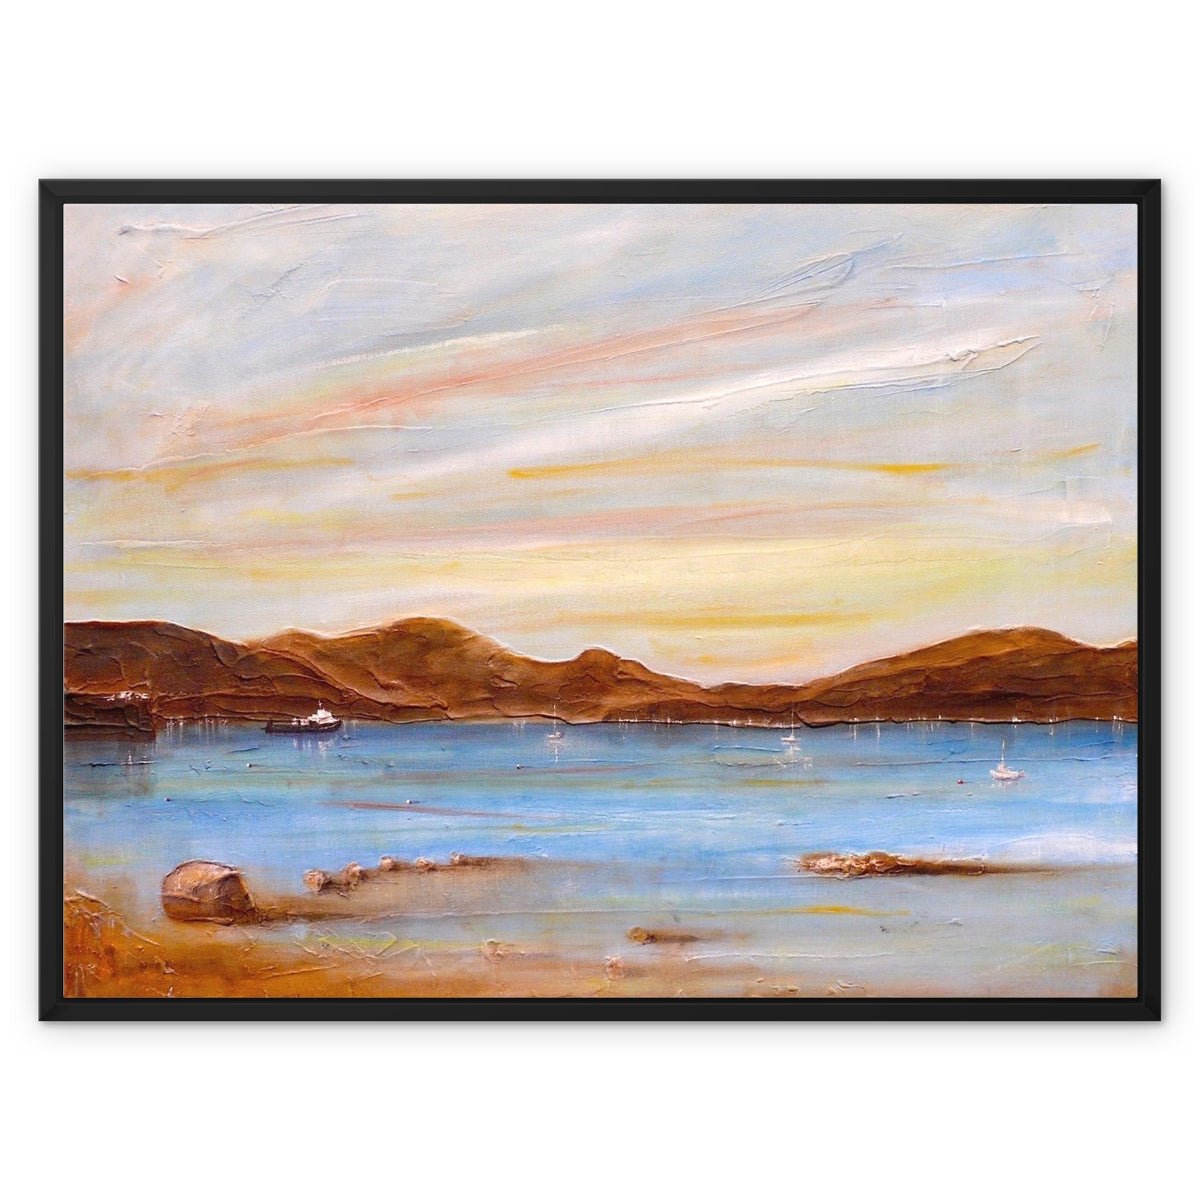 The Last Ferry To Dunoon Painting | Framed Canvas From Scotland-Floating Framed Canvas Prints-River Clyde Art Gallery-32"x24"-Black Frame-Paintings, Prints, Homeware, Art Gifts From Scotland By Scottish Artist Kevin Hunter